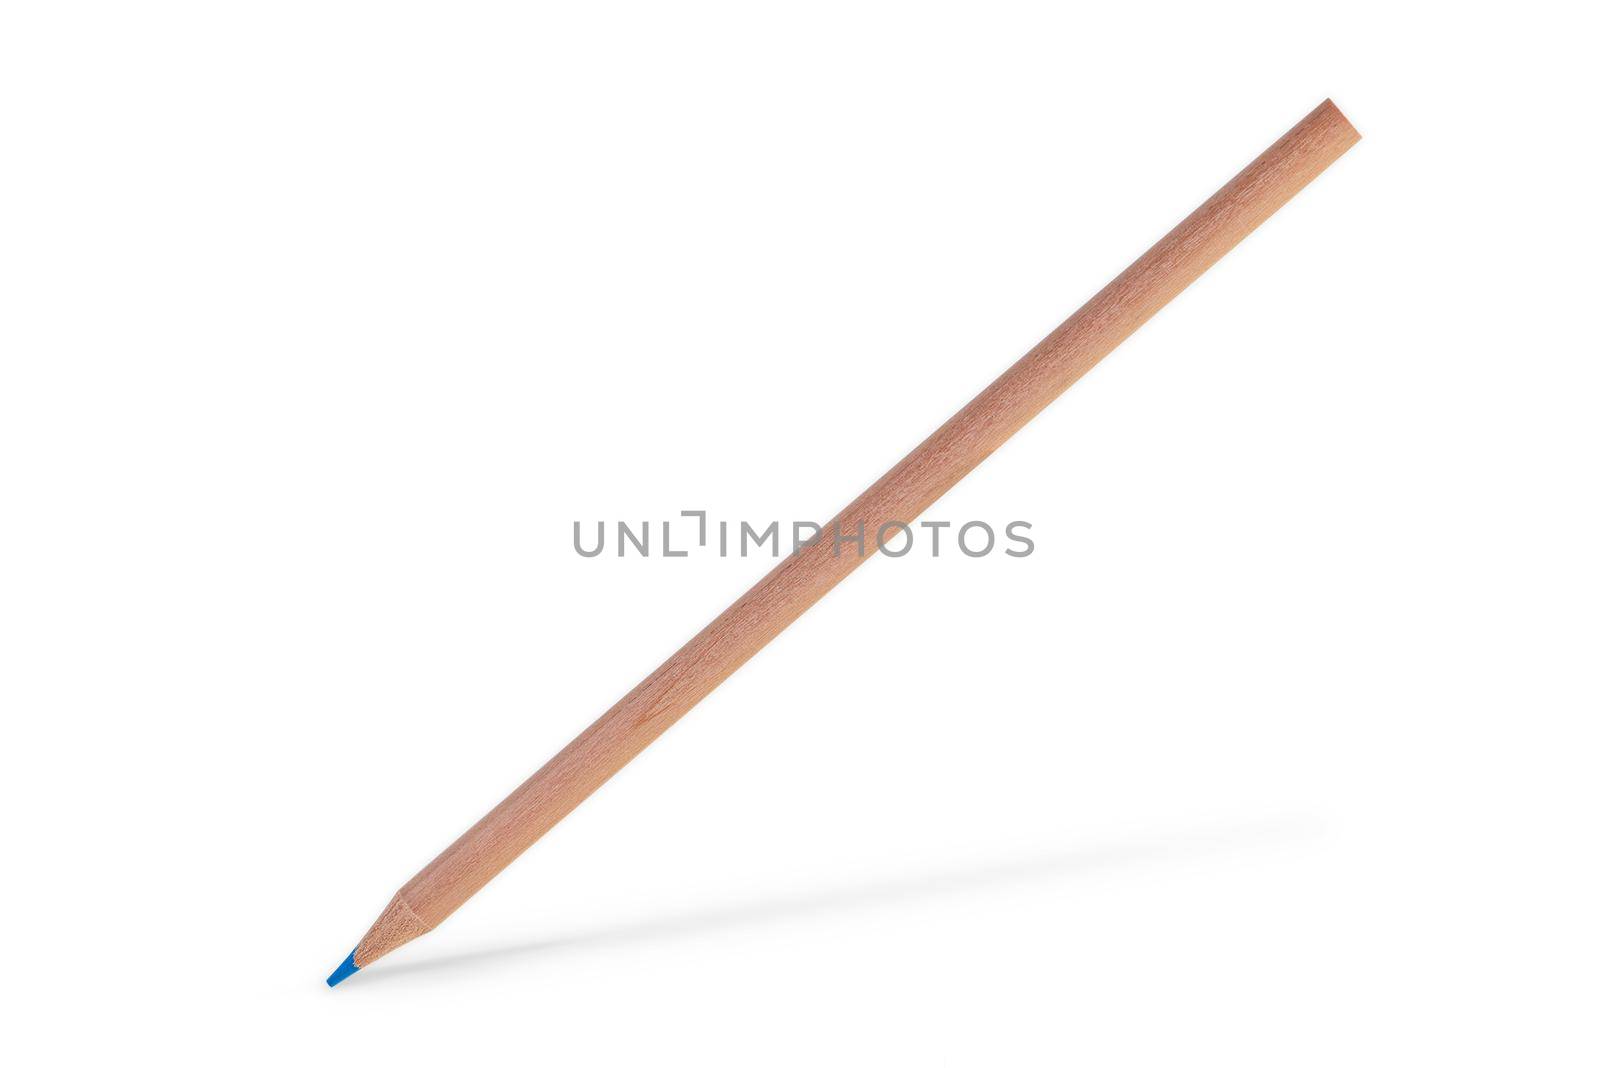 A blue pencil hovers against a white background casting a shadow. Pencil isolate on white.